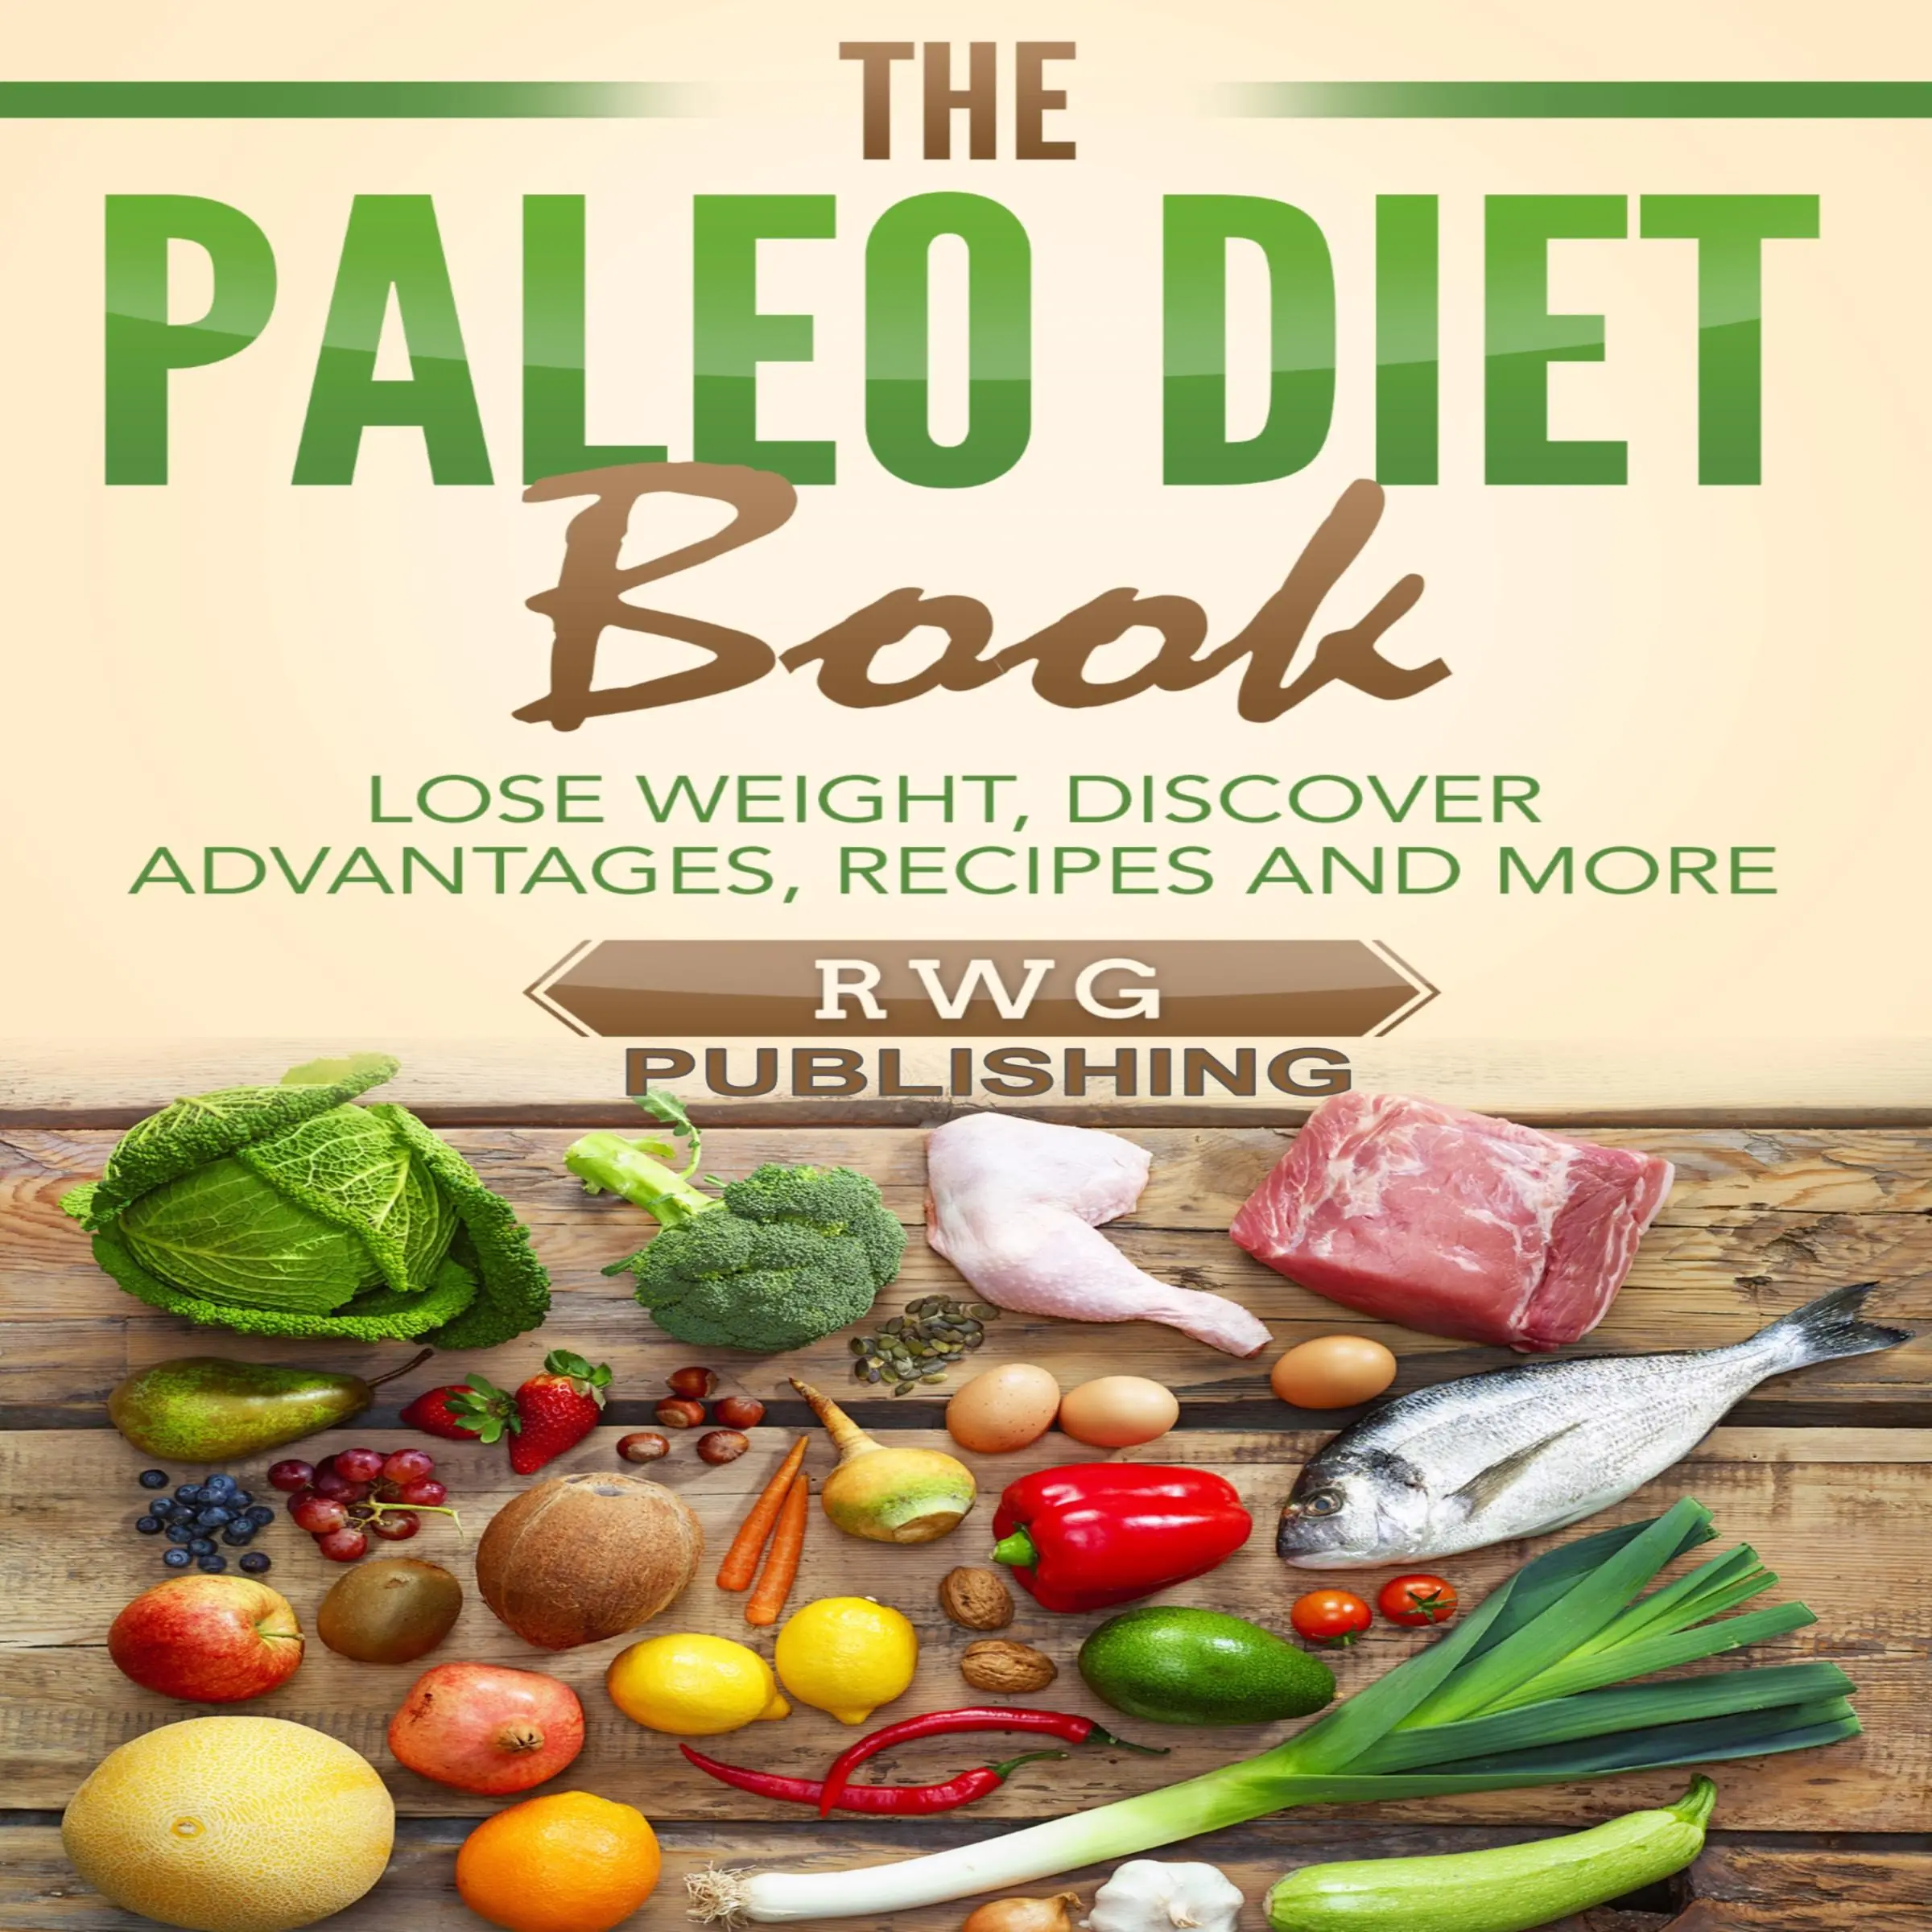 The Paleo Diet Book: Lose Weight, Discover Advantages, Recipes and More Audiobook by RWG Publishing